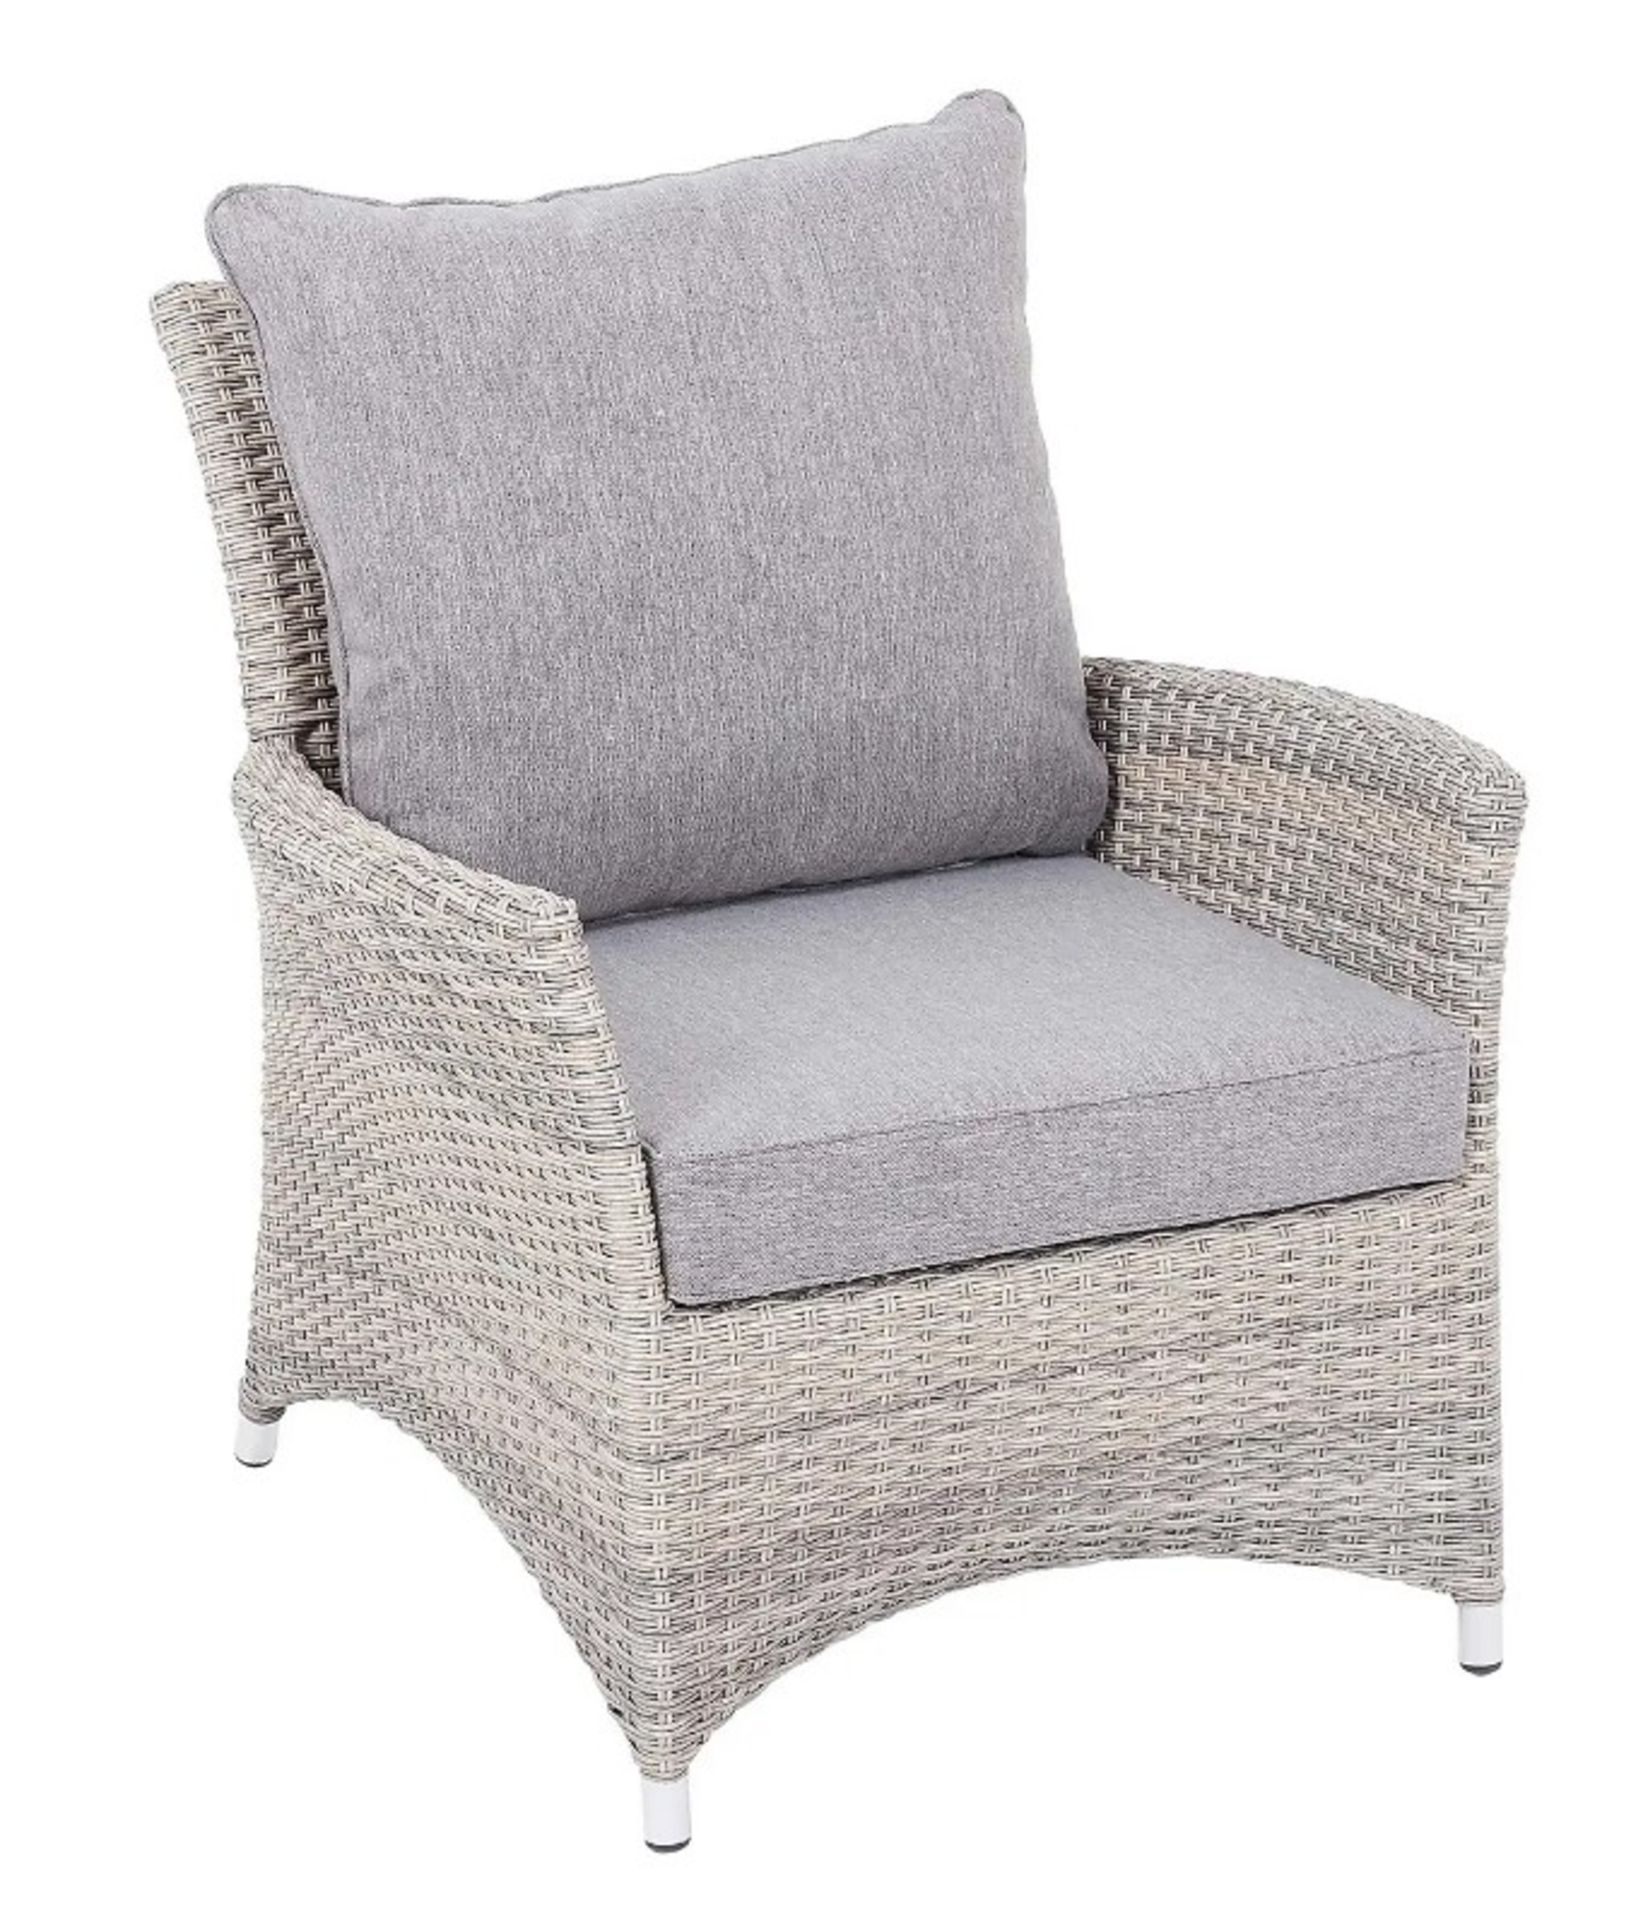 (34/Mez) Hartington Florence Collection Rattan Armchair with 2x Cushions. (Appears Clean, Unused,...